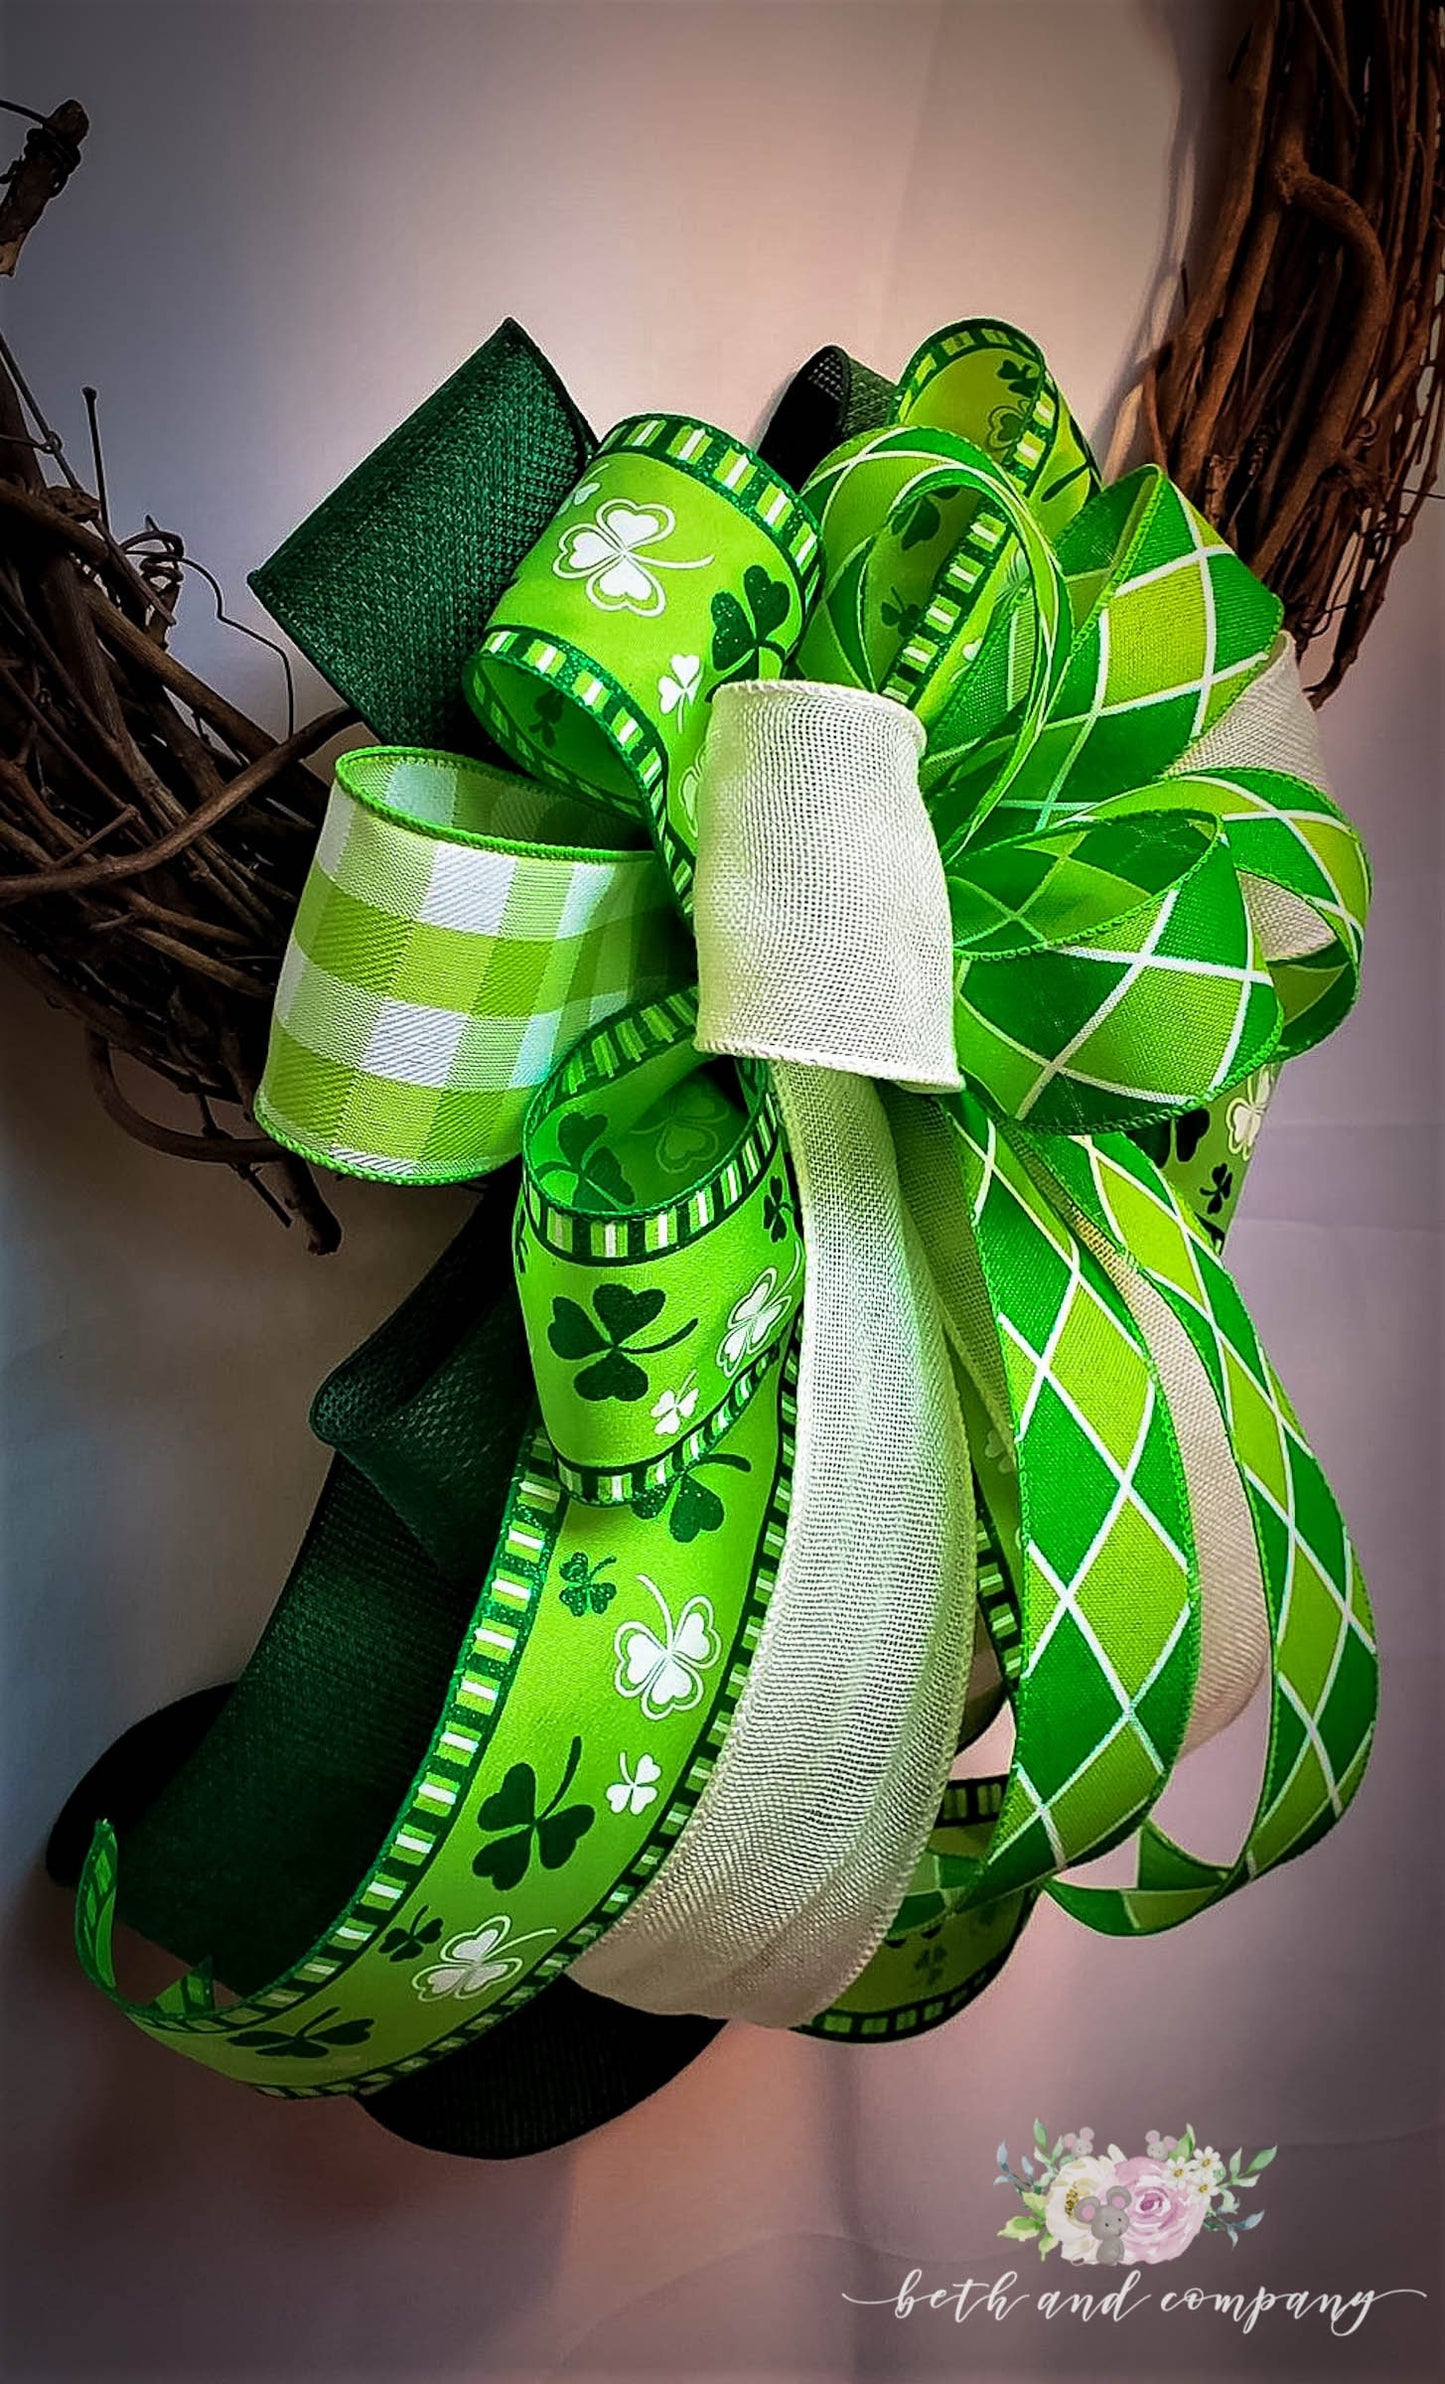 St Patricks Day Bow for front door, St Pattys day wreath bow, St Patricks Lantern Bow, Green bow, Green Wreath Bow for St Pattys